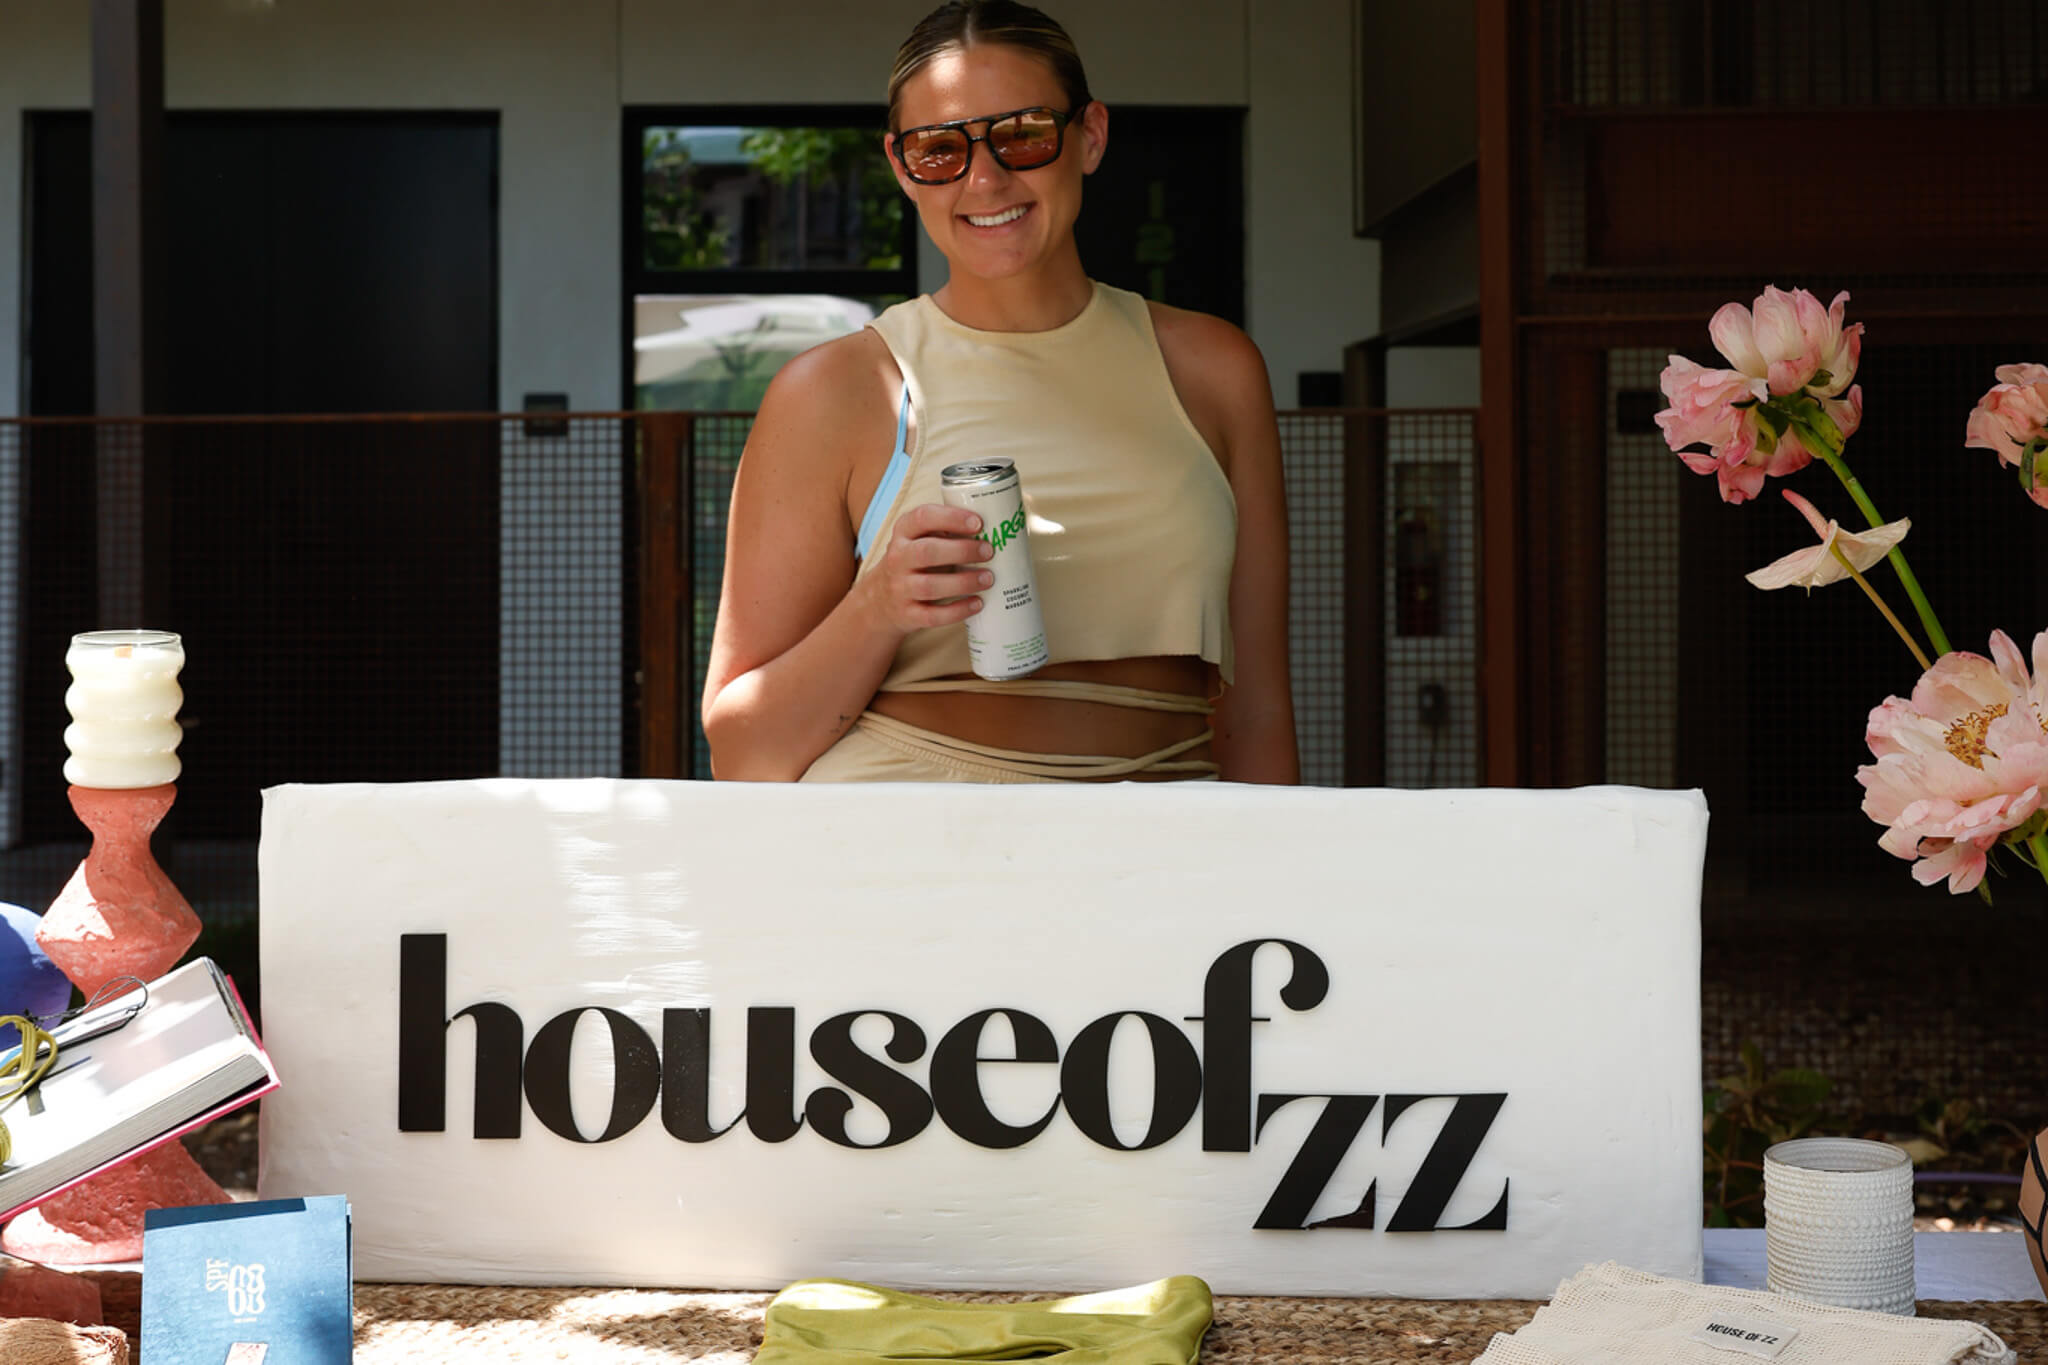 House of ZZ founder by a sign